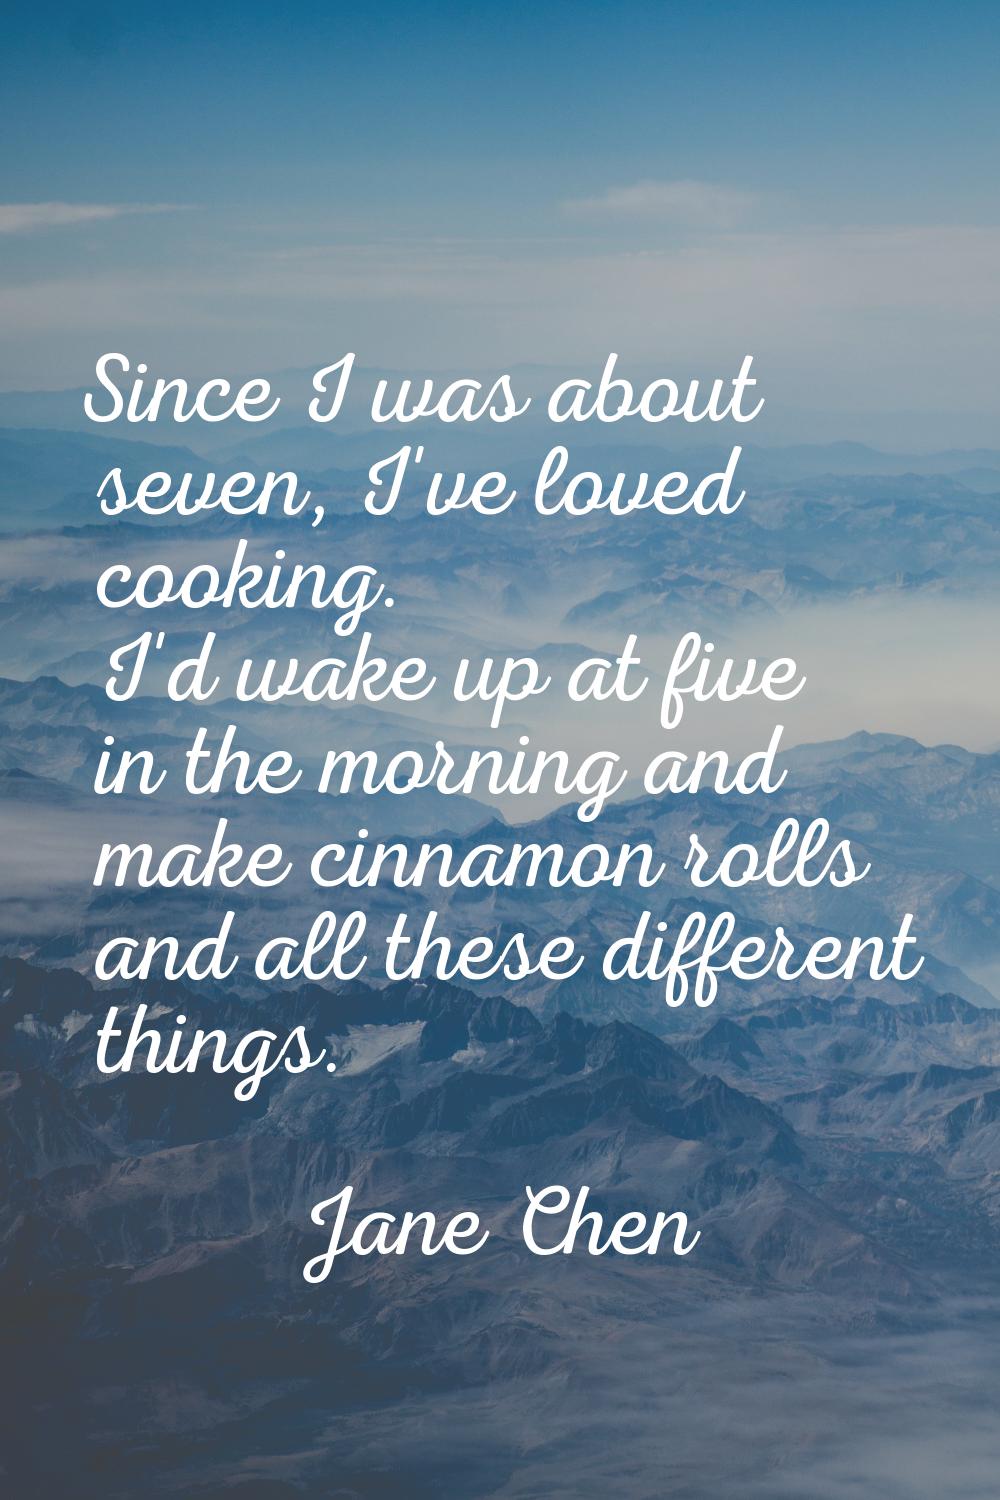 Since I was about seven, I've loved cooking. I'd wake up at five in the morning and make cinnamon r